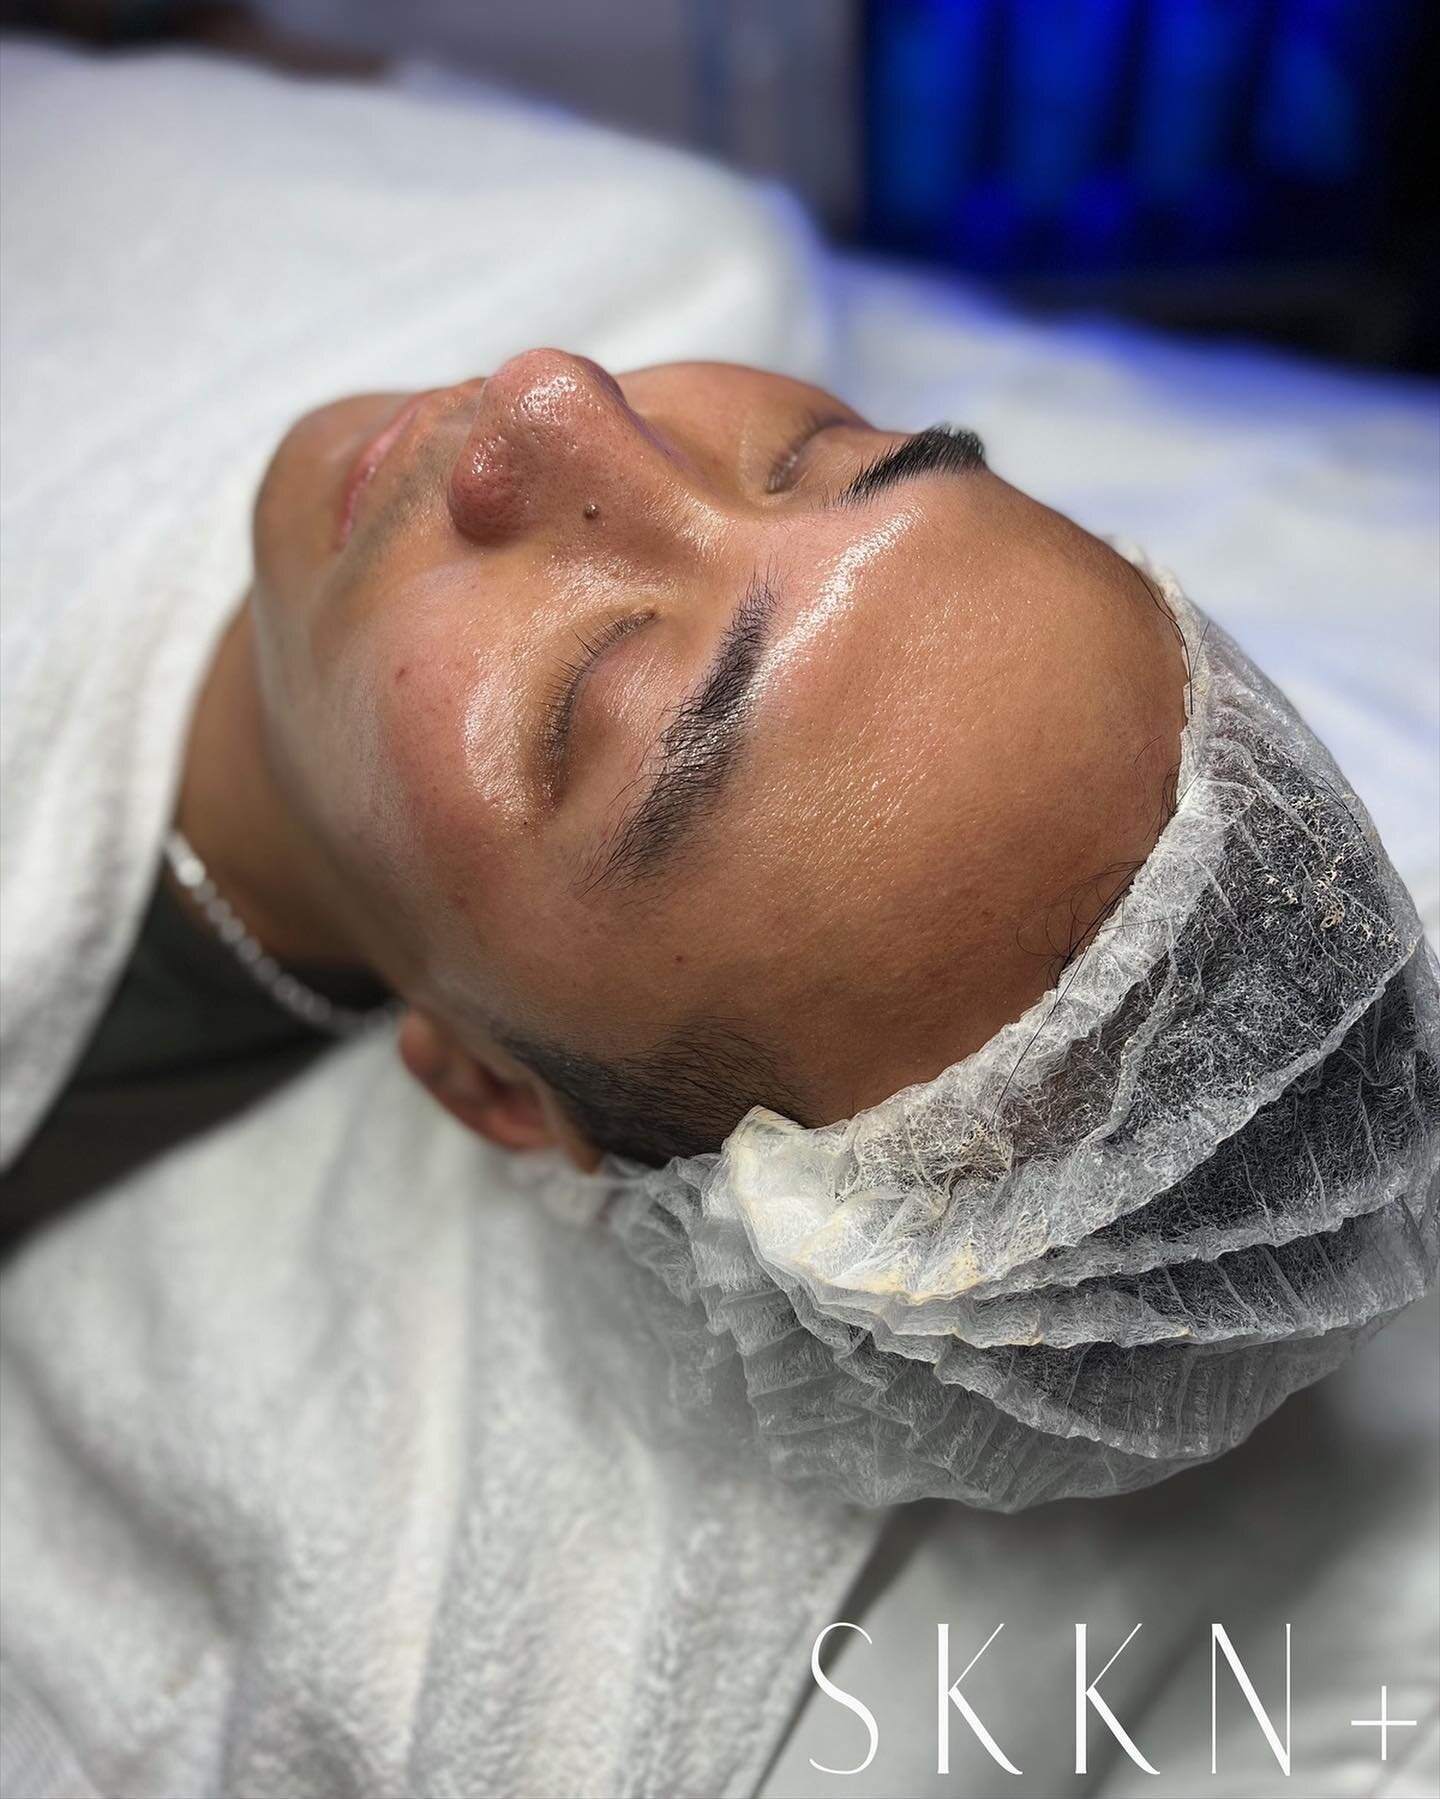 + | The focus for this facial was blackhead removal and hydration! We highly recommend @skinbetter &lsquo;s Solo Hydrating Defense for Men. This is an all-in-one treatment serum that absorbs quickly into the skin without clinging to facial hair ✨
+
+